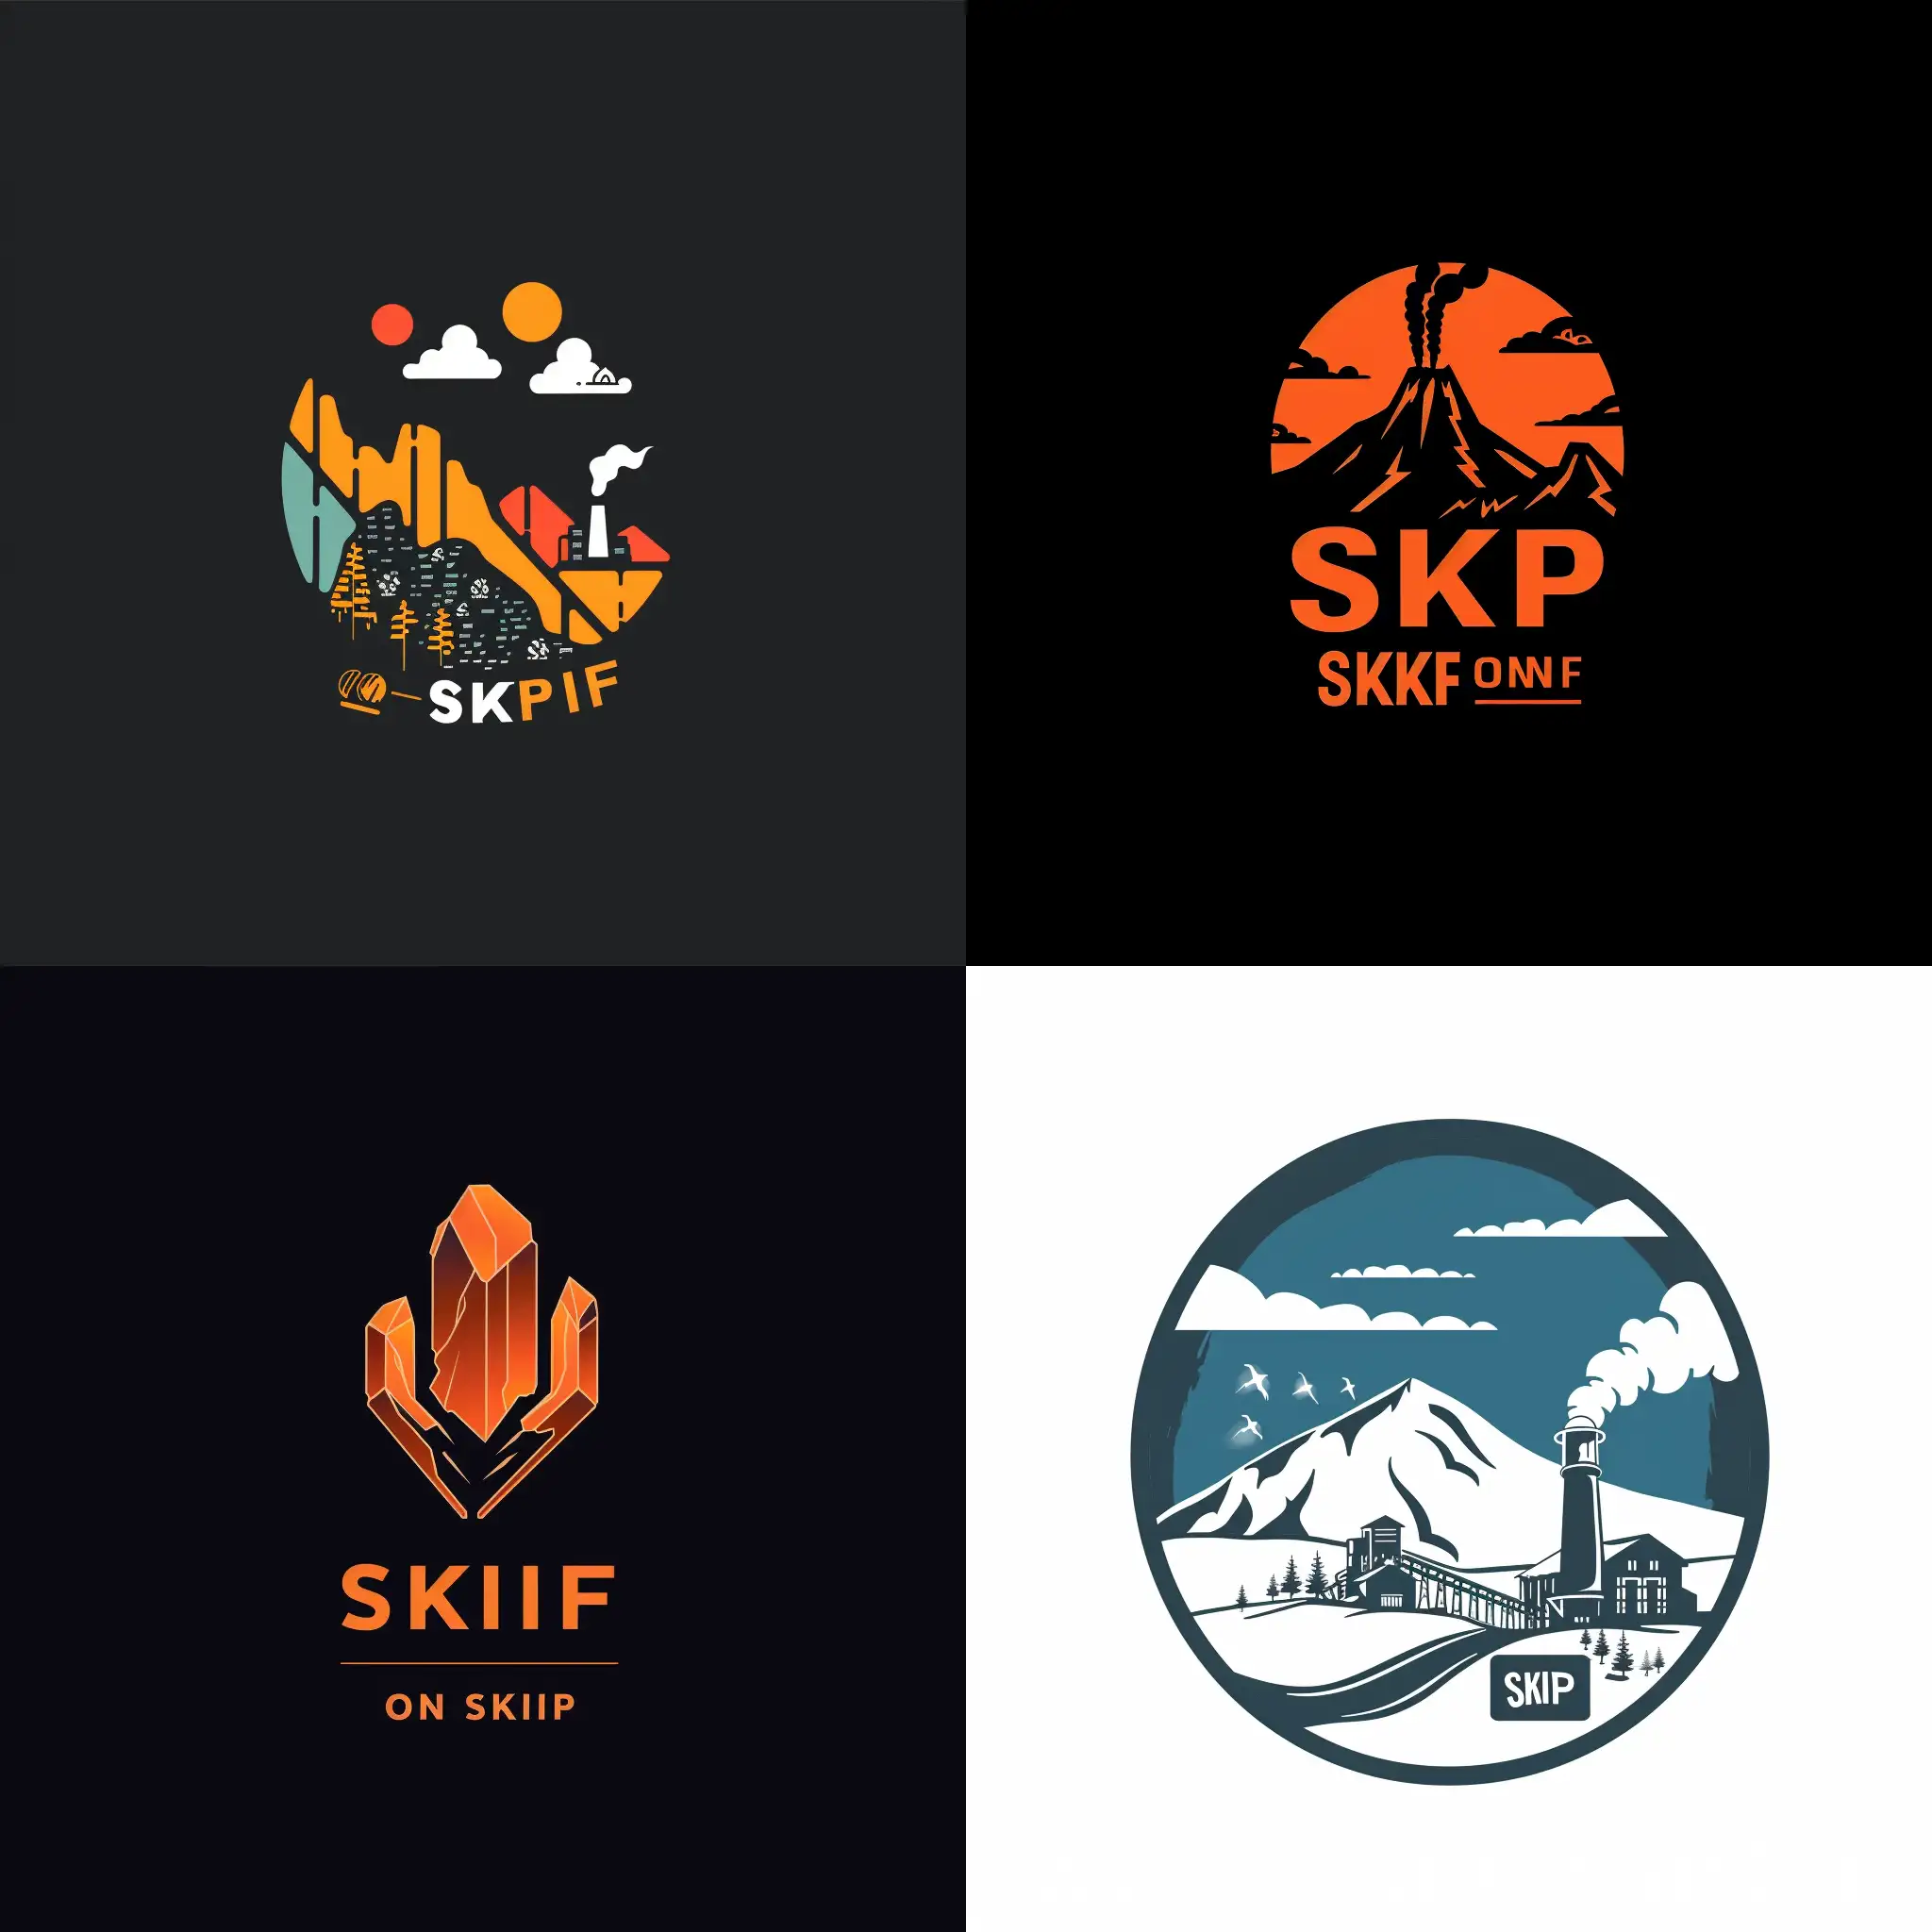 The logo FROM the SKIF service with the theme of the coal industry